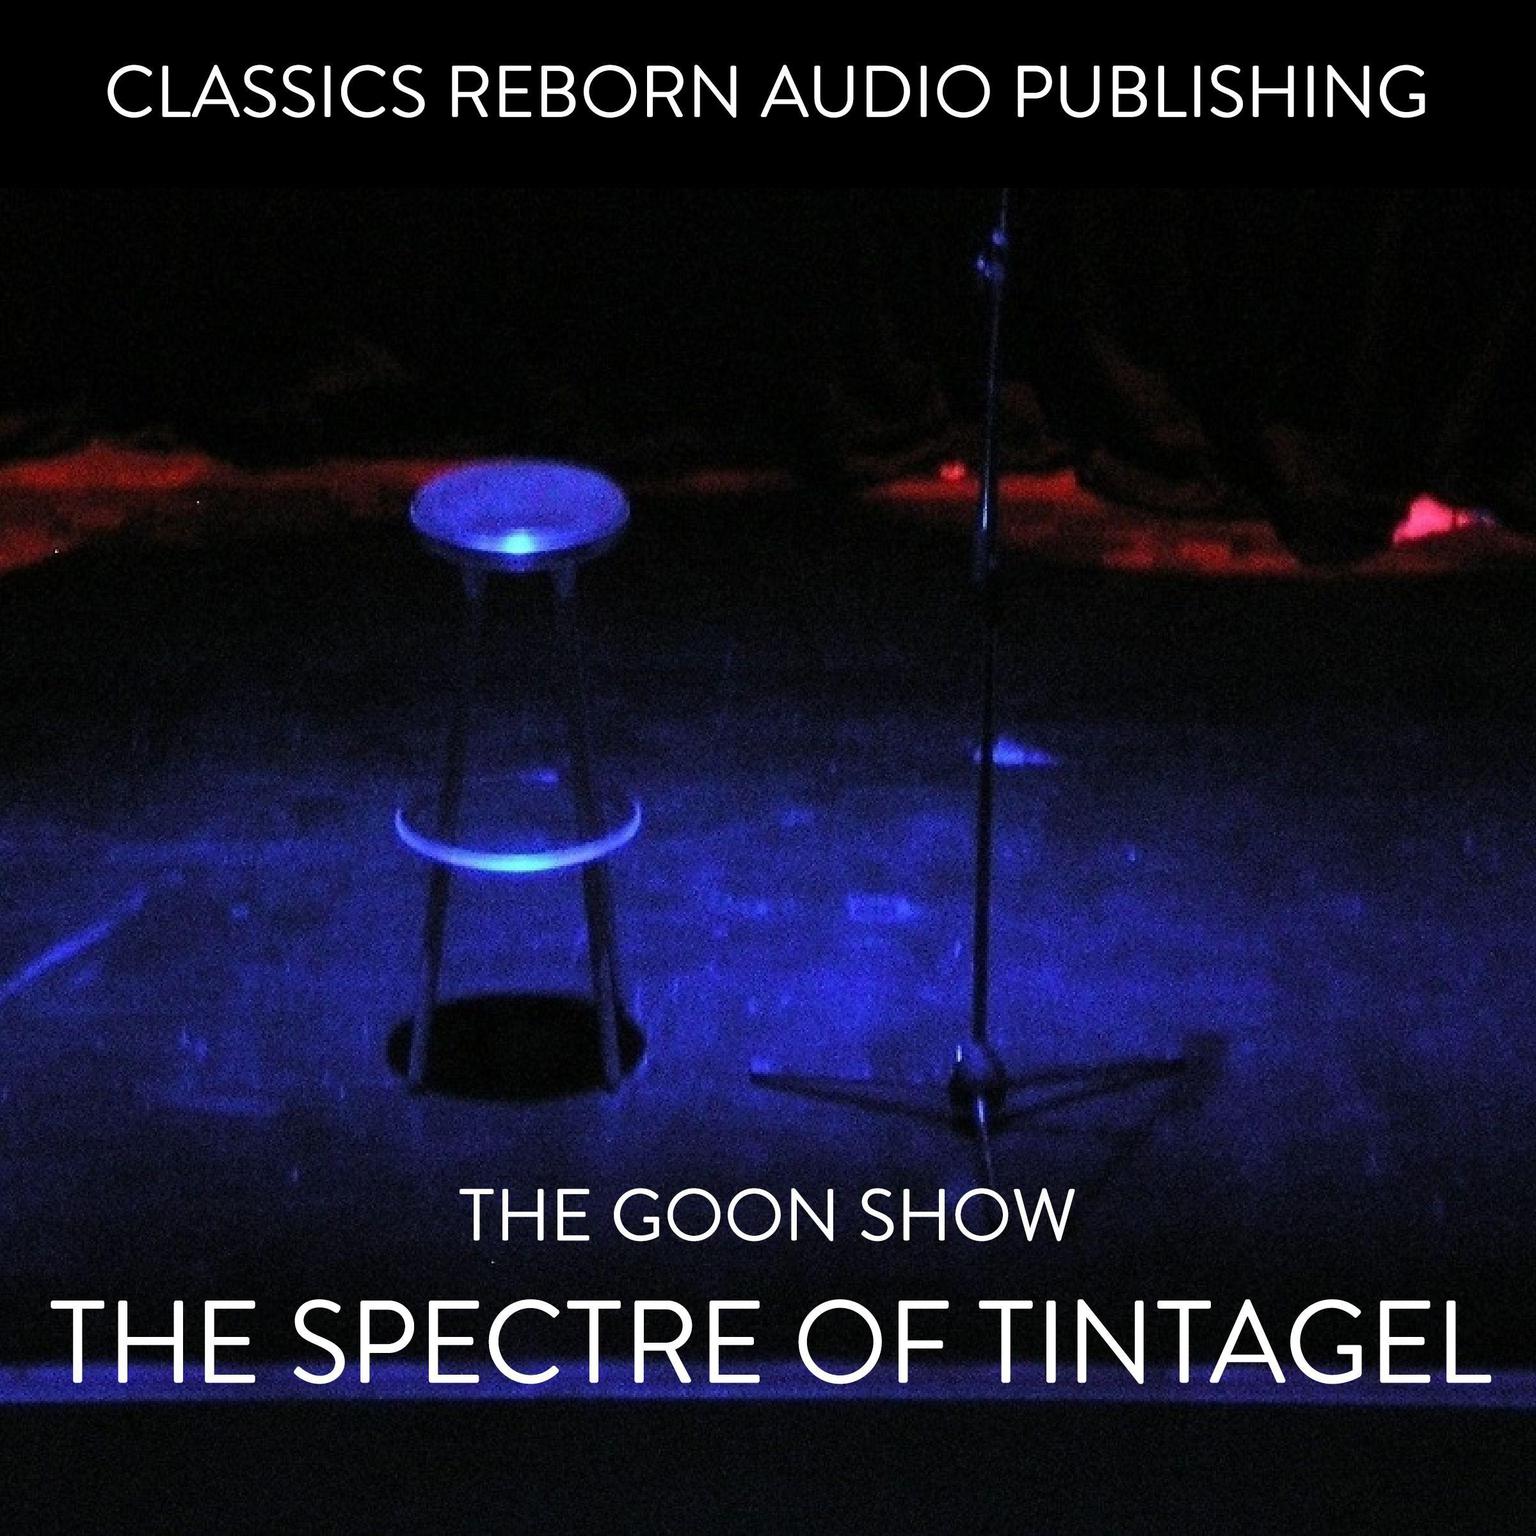 The Goon Show The Spectre of Tintagel Audiobook, by Classics Reborn Audio Publishing